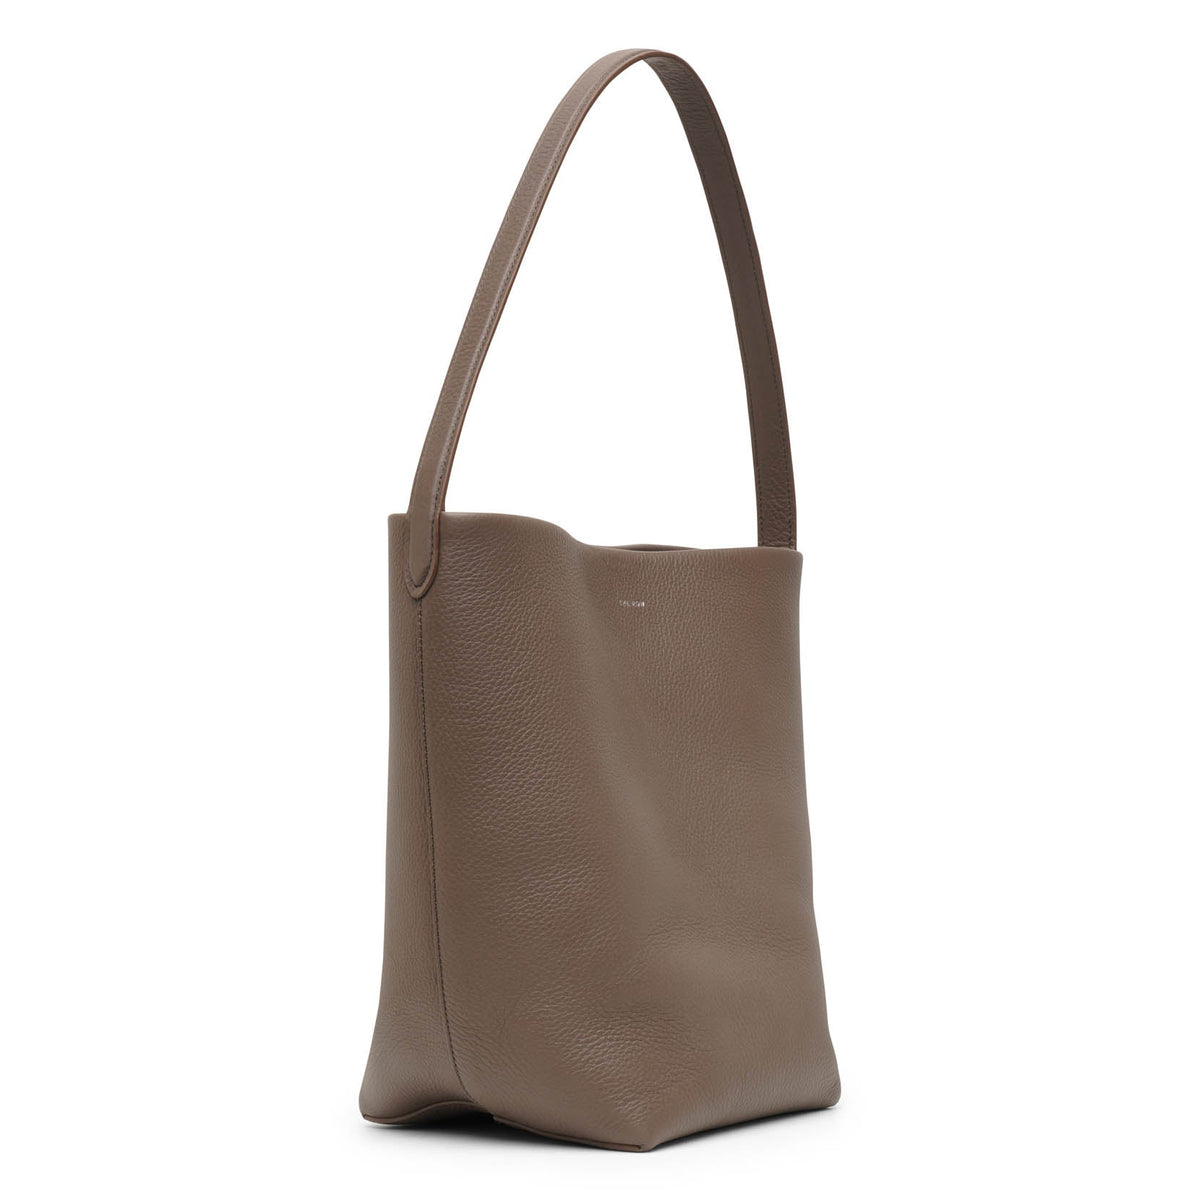 N S Park Leather Tote Bag in Black - The Row